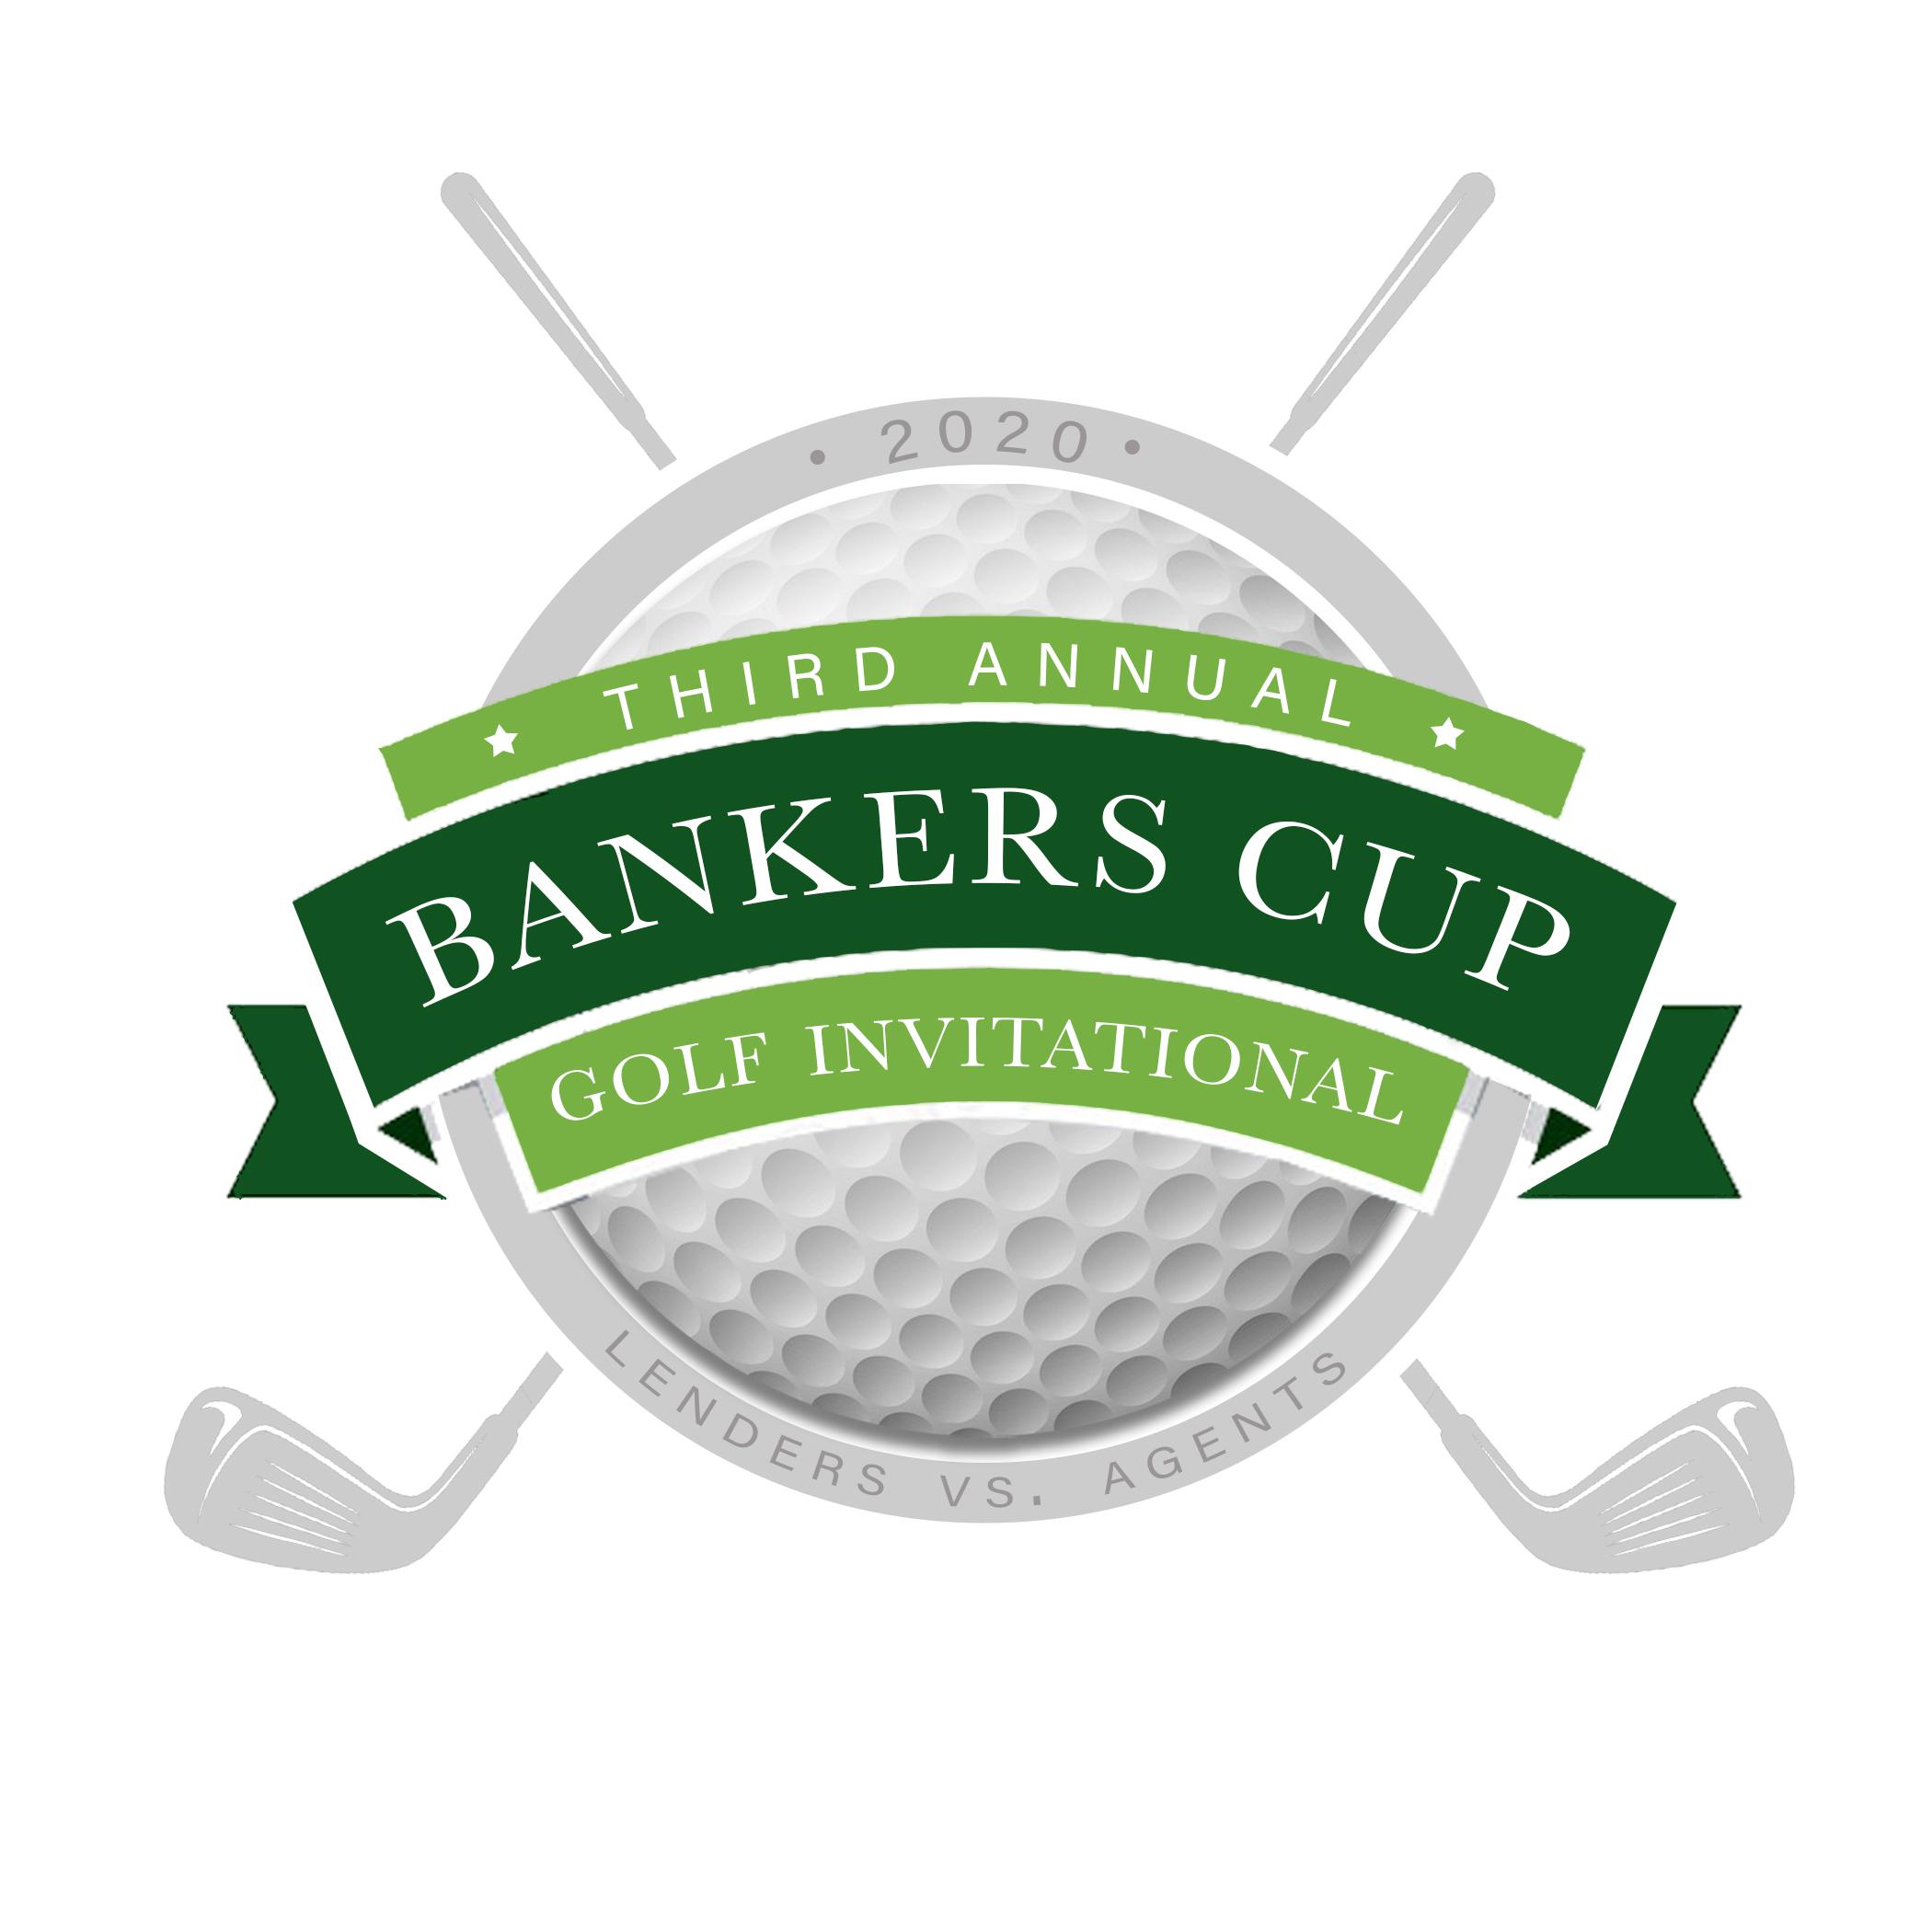 Copy of The Banker's Cup Golf Invitational